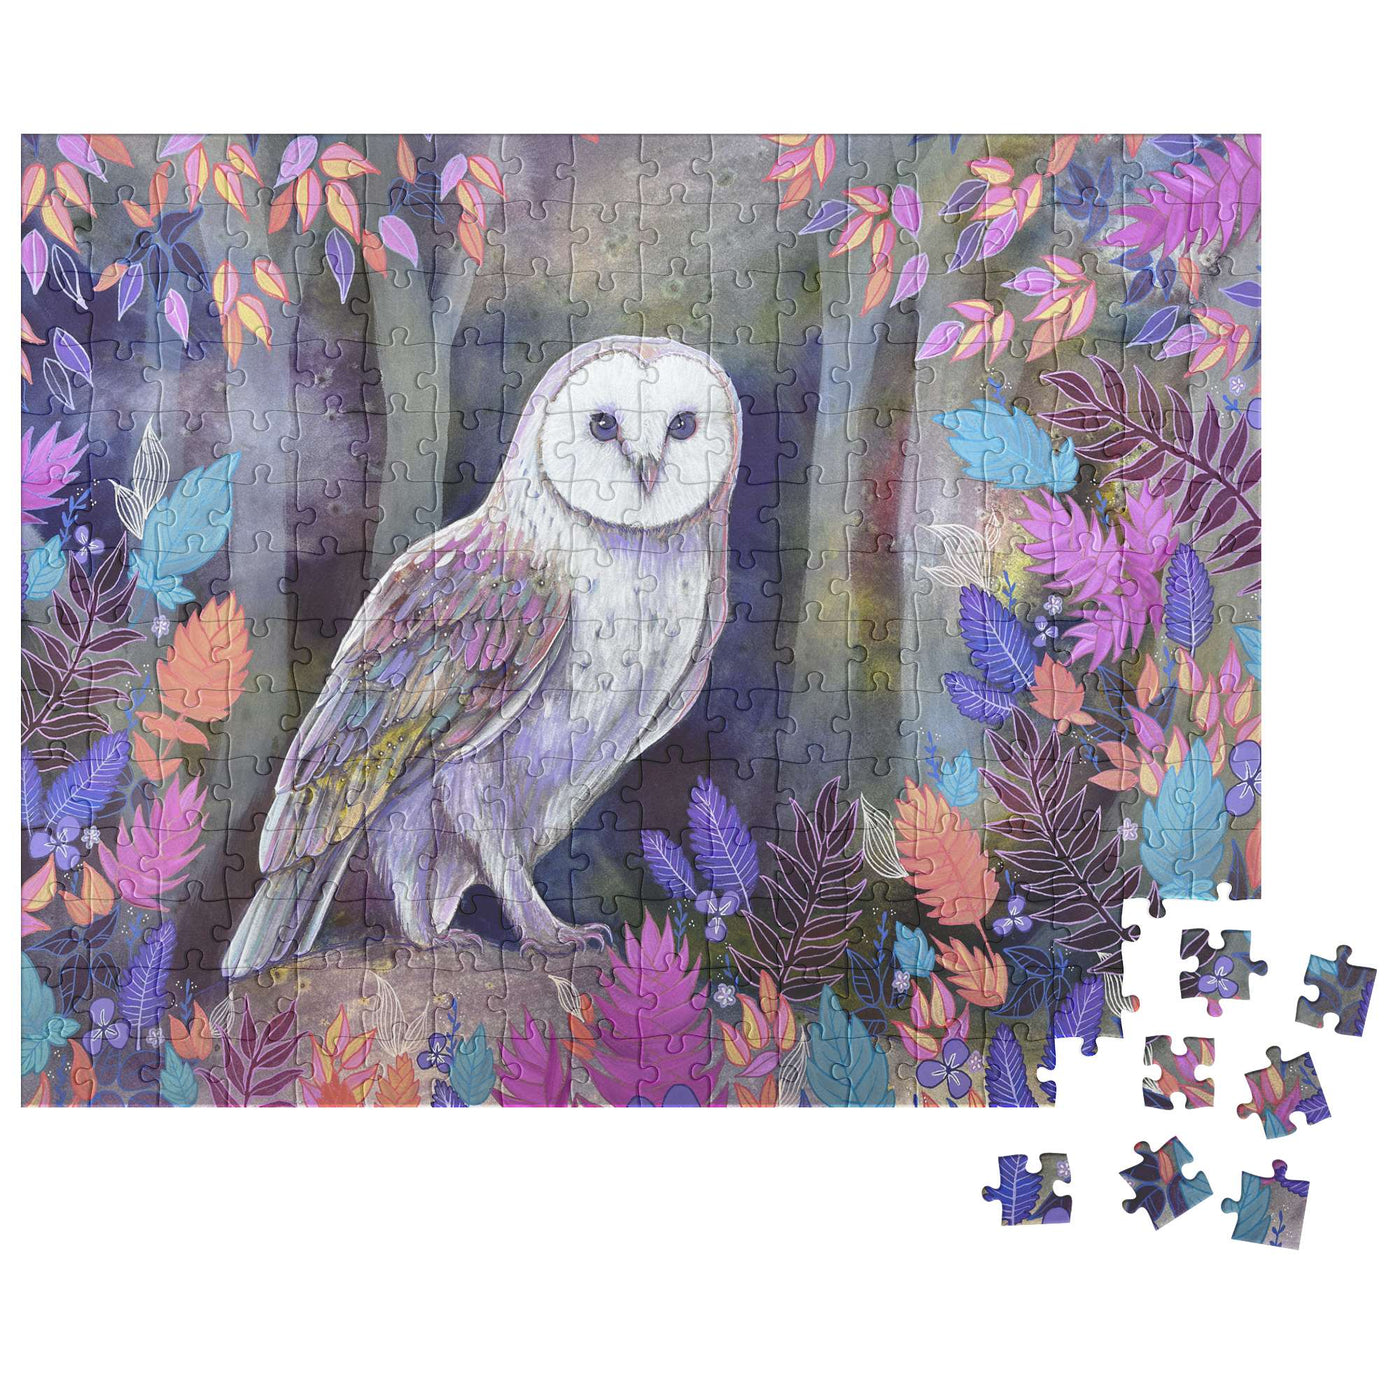 Owl Puzzle featuring a snowy owl perched on a branch amid colorful leaves, with a few pieces detached on the side.